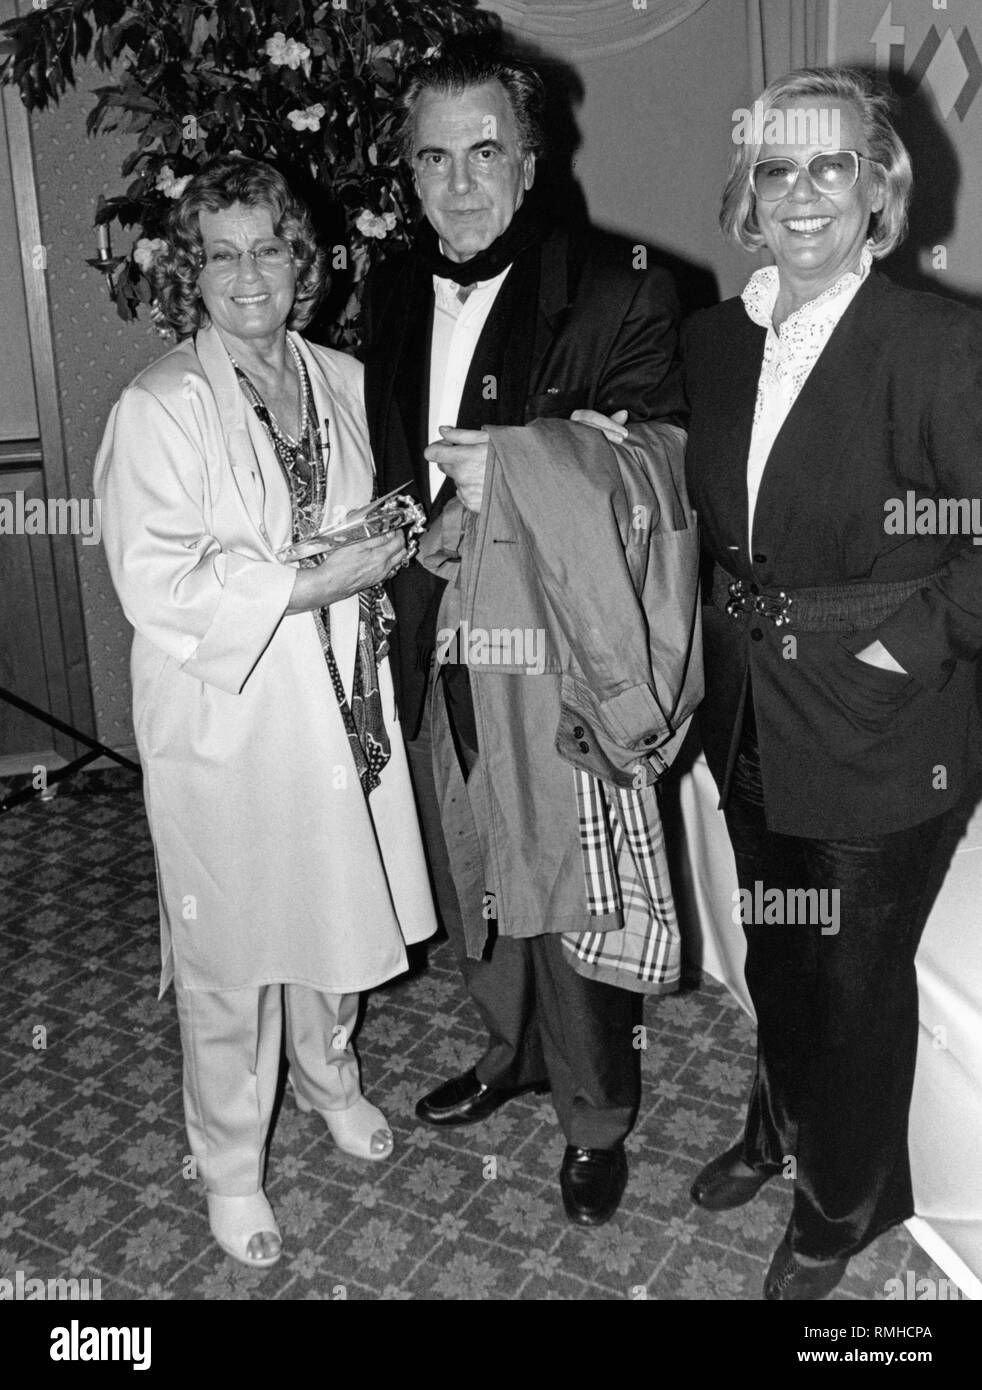 https://c8.alamy.com/comp/RMHCPA/immy-schell-maximilian-schell-and-maria-schell-from-right-in-munich-RMHCPA.jpg